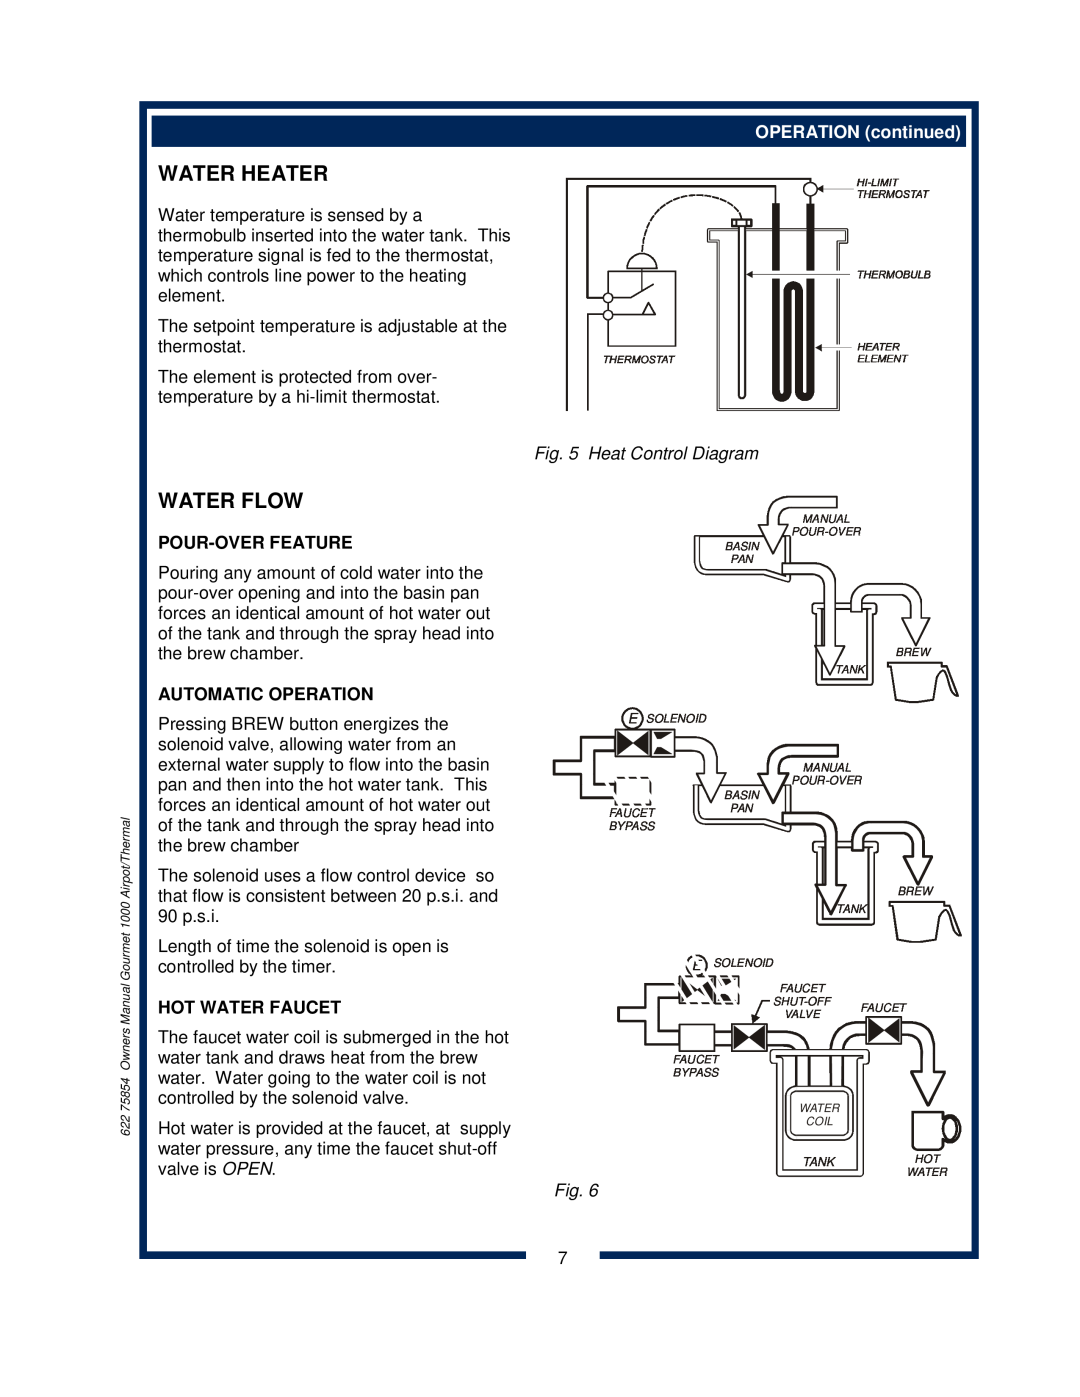 Bloomfield 8778 Water Heater, Water Flow, OPERATION continued, Heat Control Diagram, Pour-Over Feature, Hot Water Faucet 